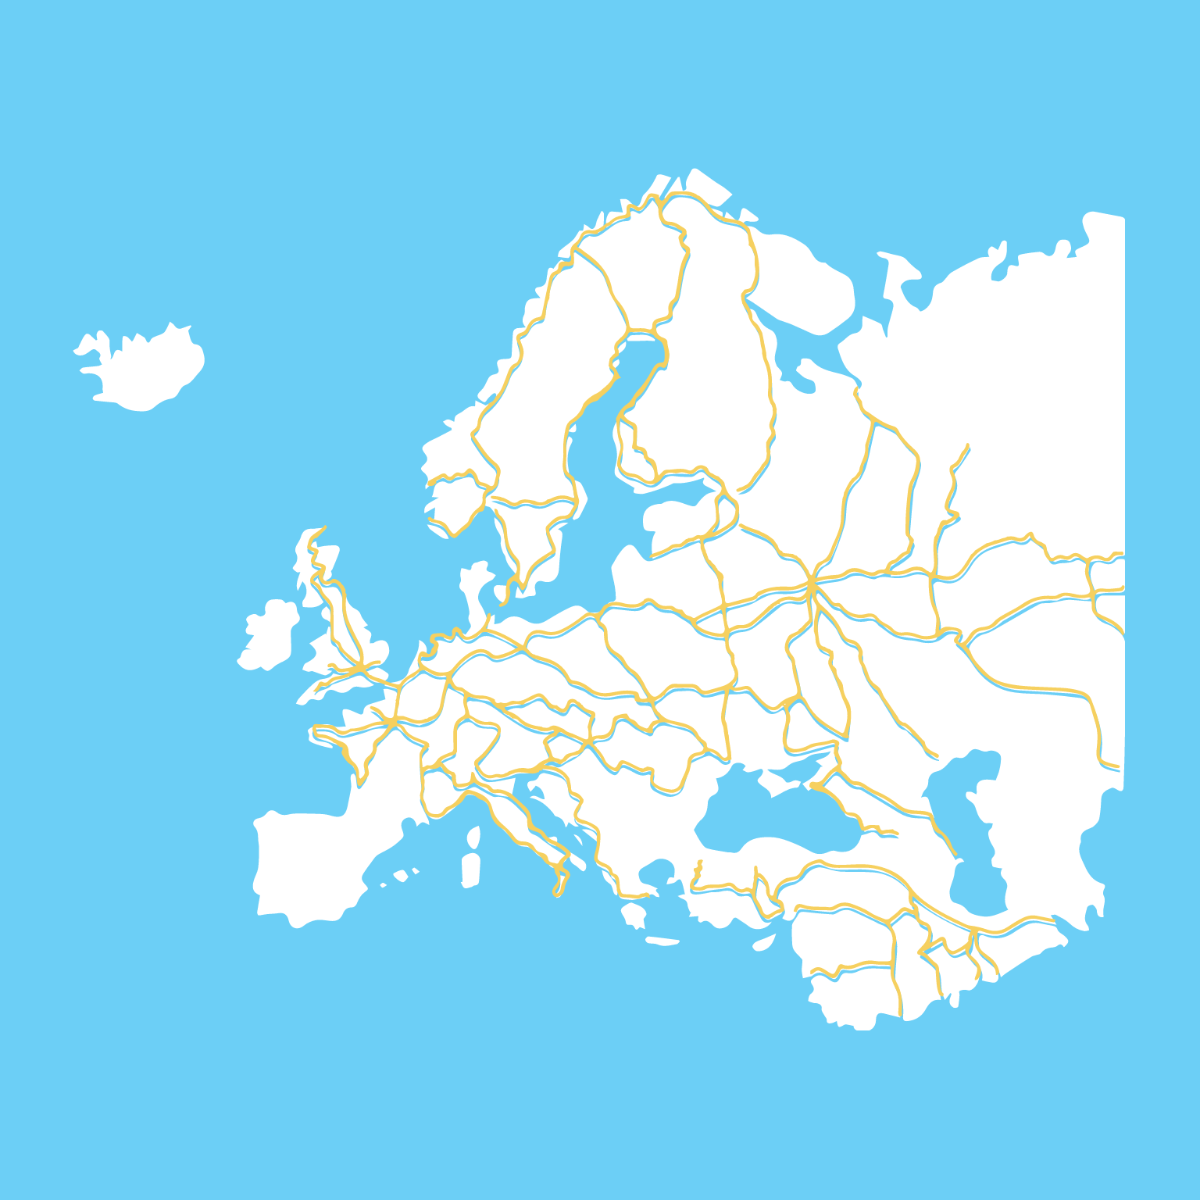 Europe Road Map Vector Template